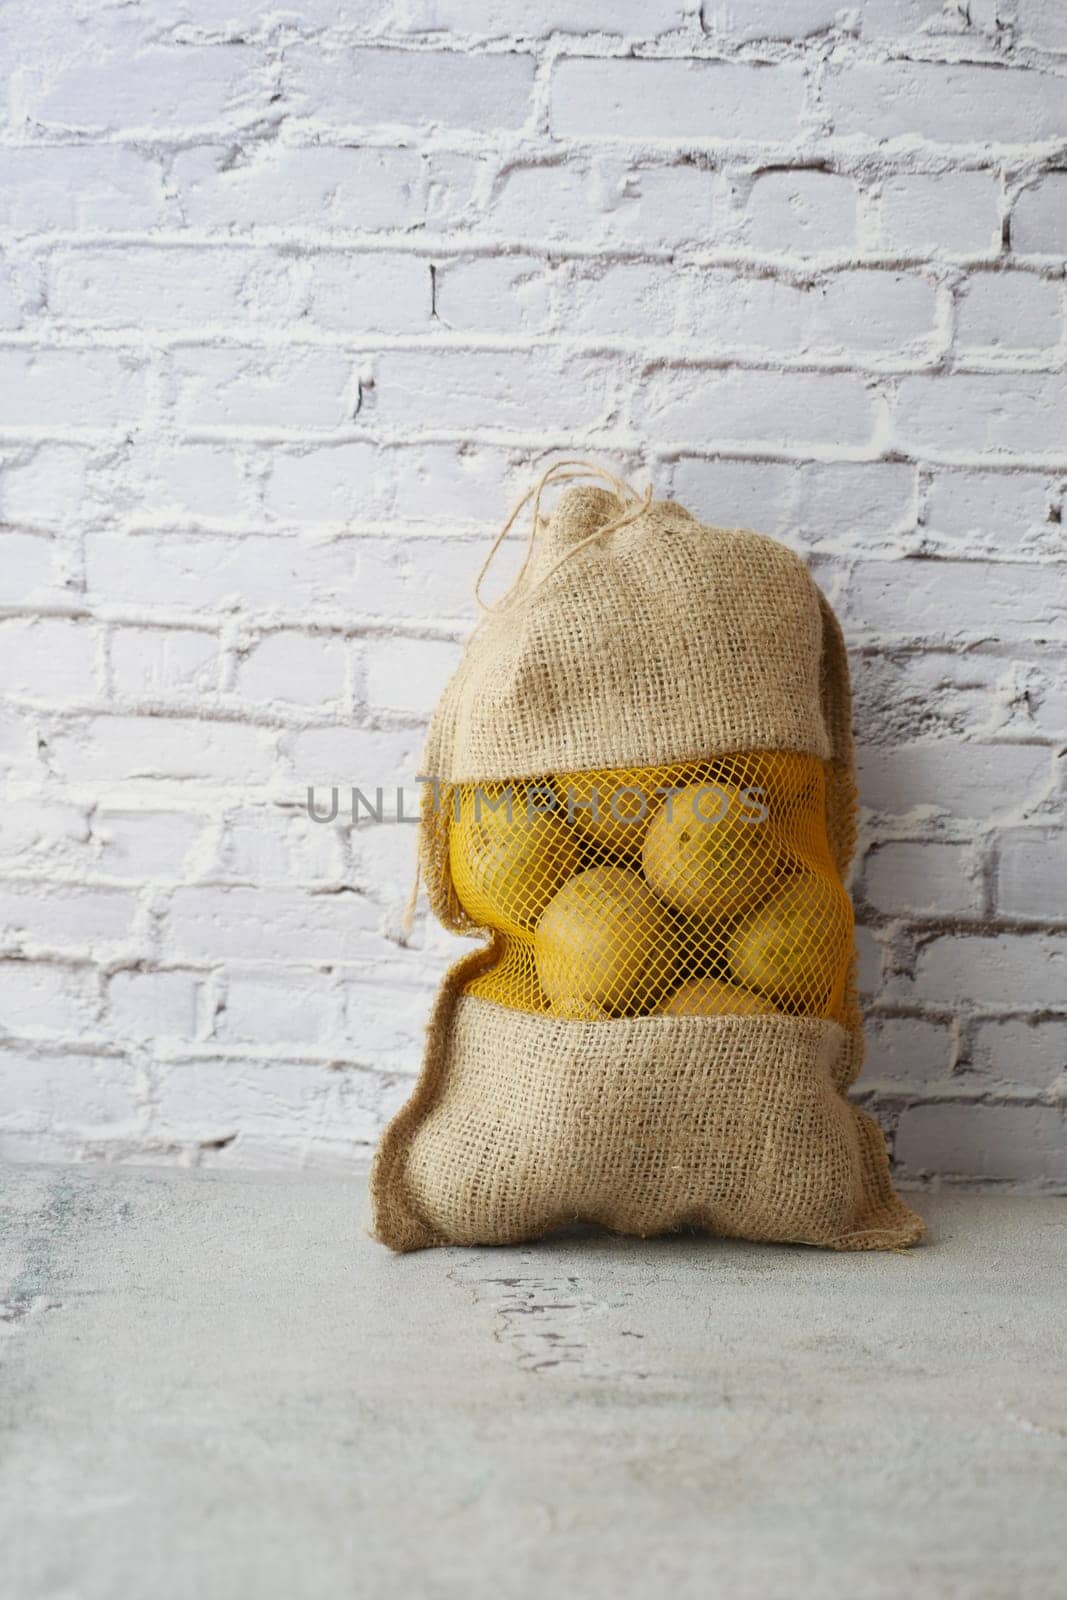 potatoes in a sack bag on table .